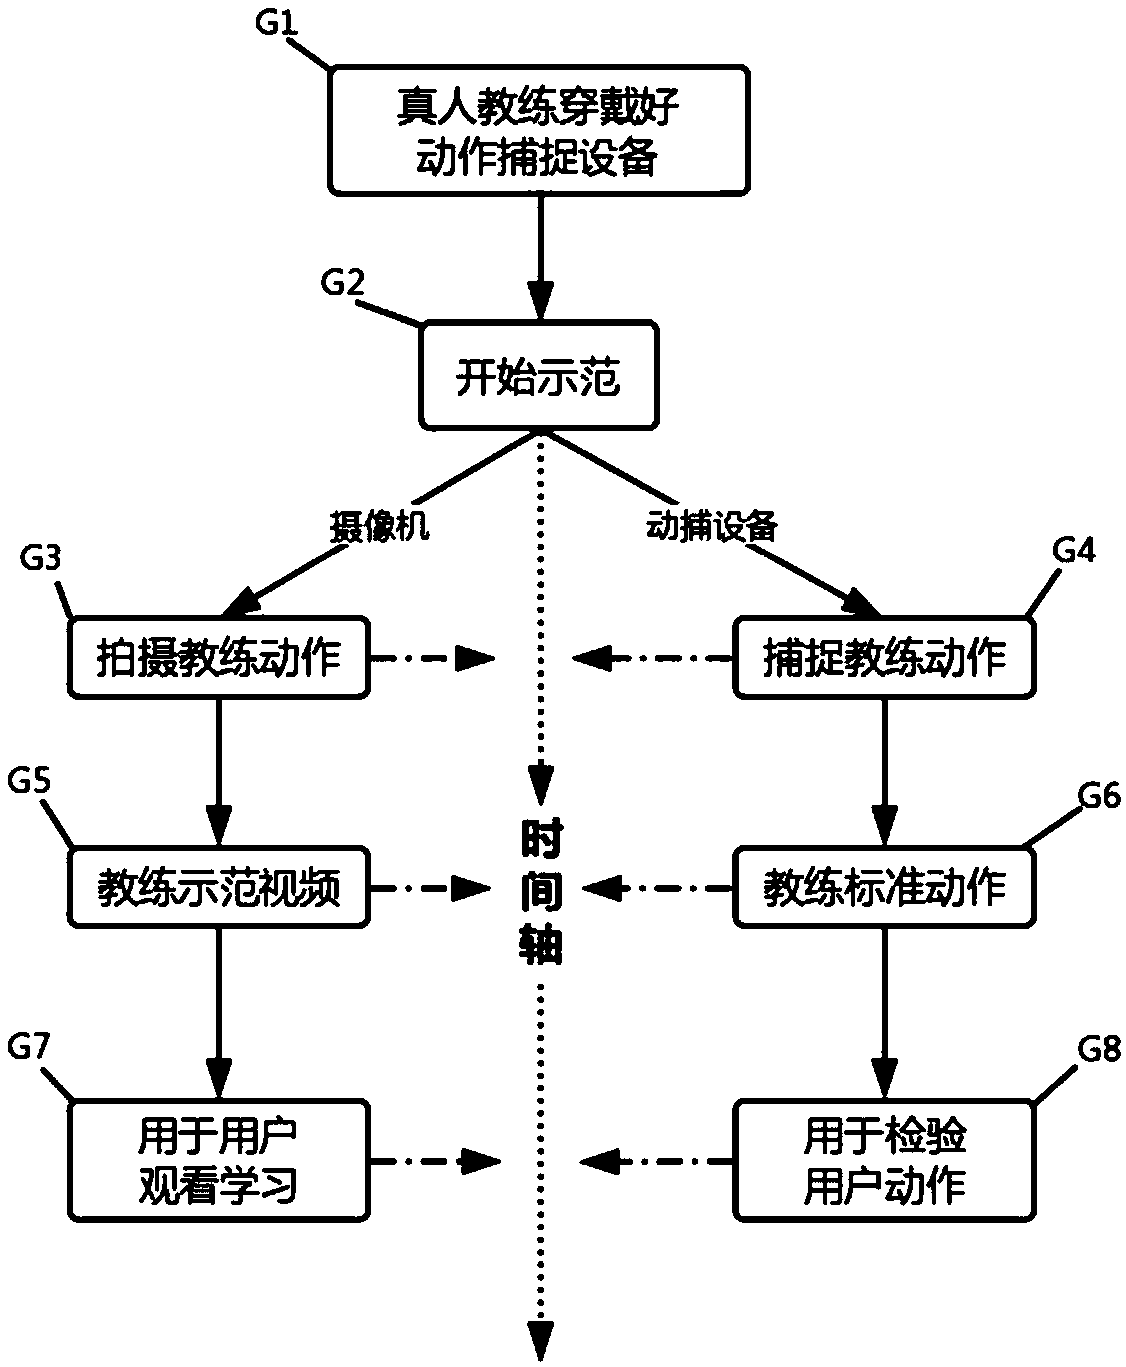 A method of video interaction and a motion assistance system based on an interactionable video